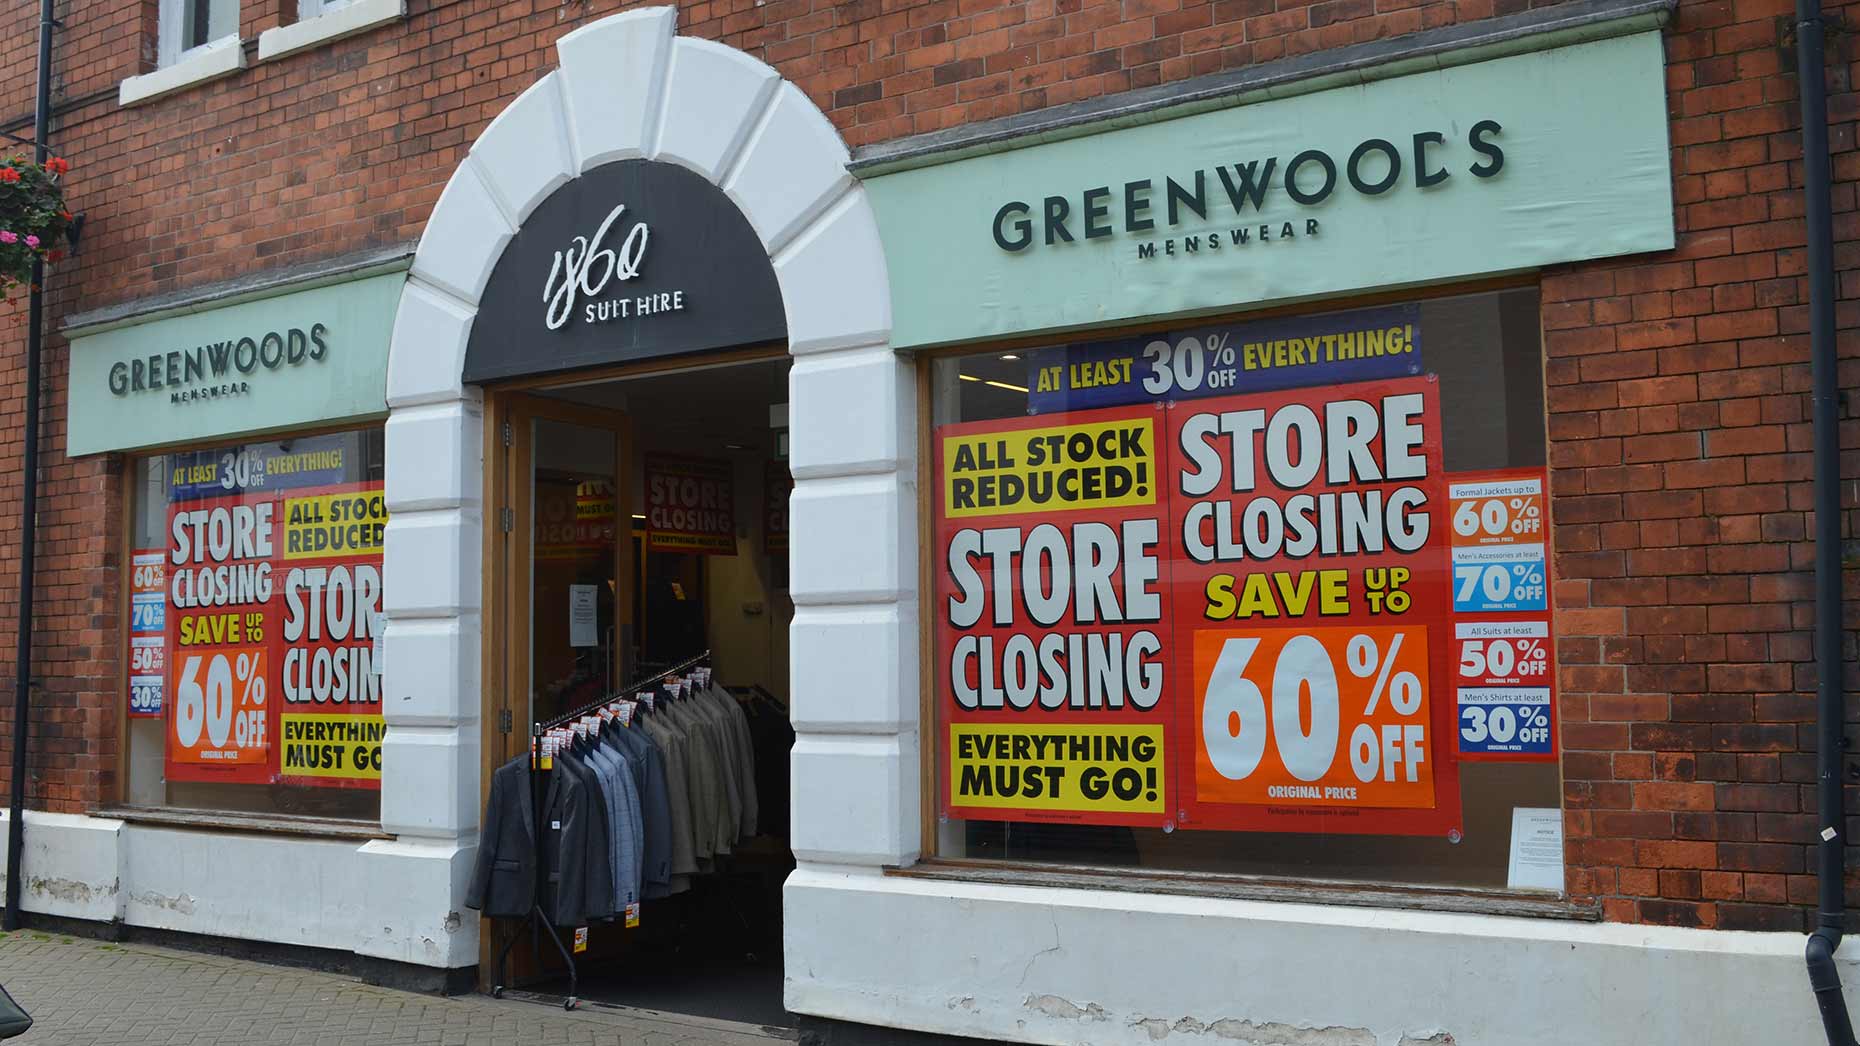 store-closing-signs-plastered-across-lincoln-menswear-shop